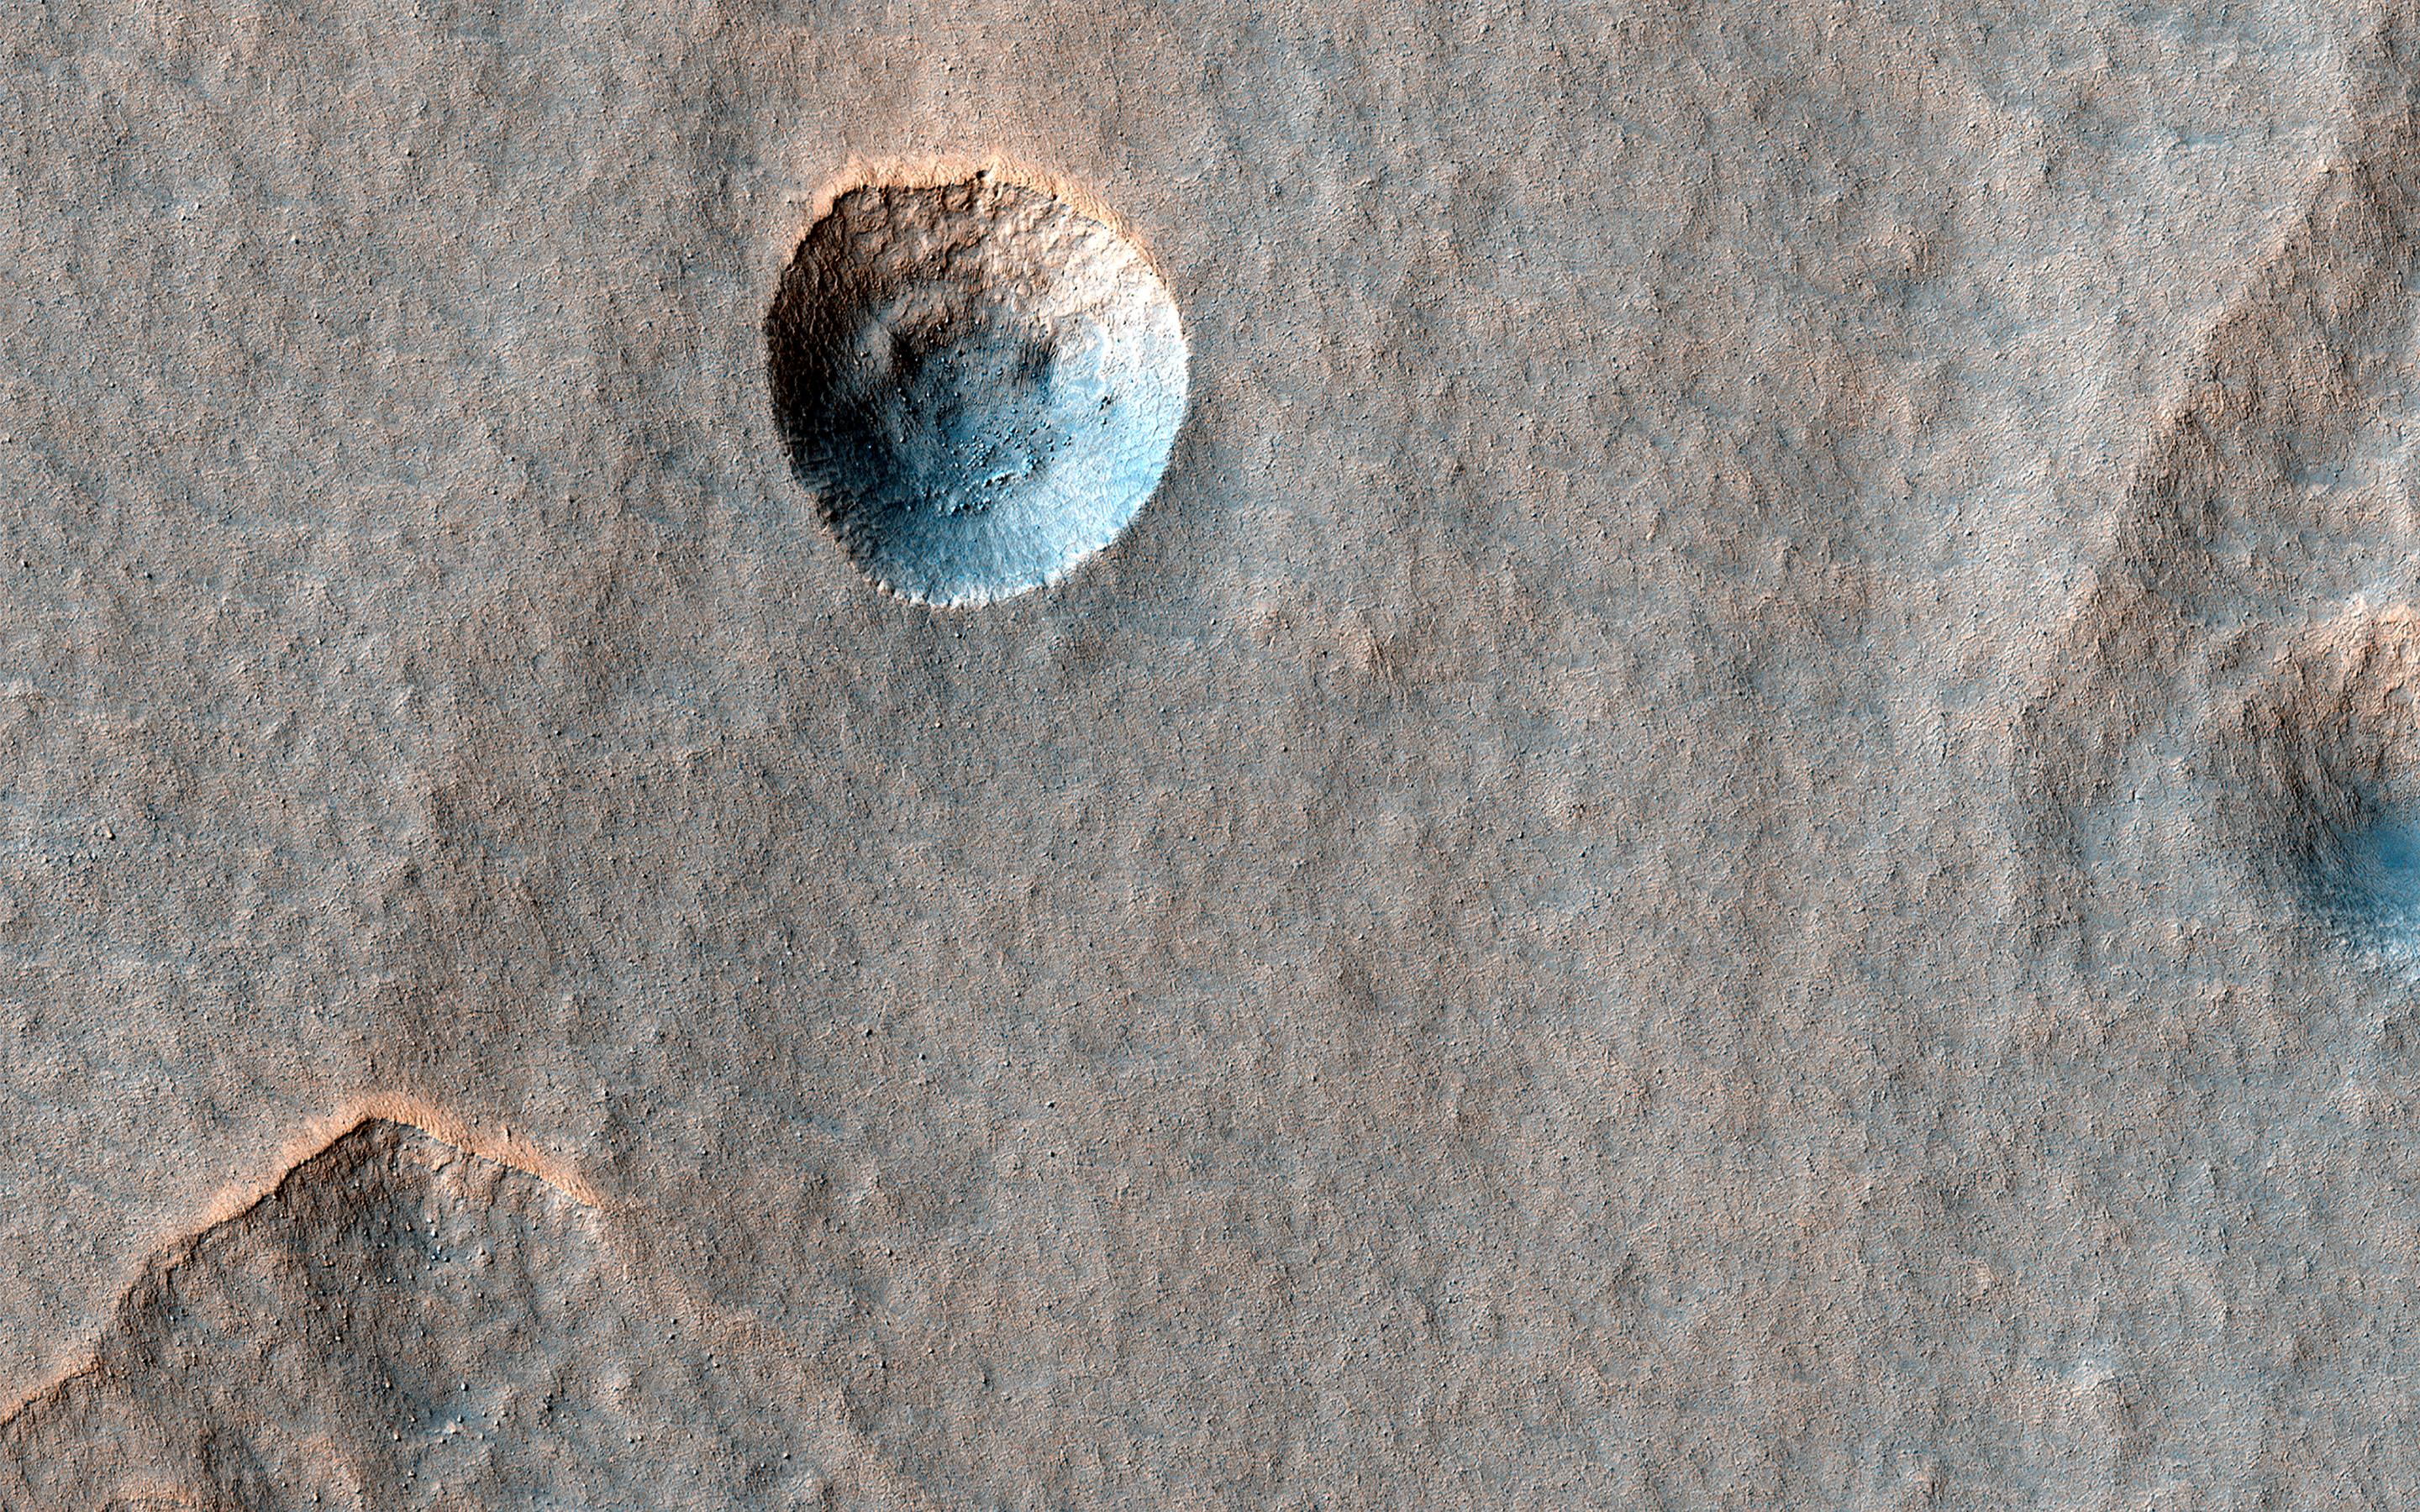 This image acquired on July 8, 2022 by NASAs Mars Reconnaissance Orbiter shows what appears to be a slightly expanded crater in a field of scalloped depressions. Its possible that it will evolve over time to look more like the scallops.